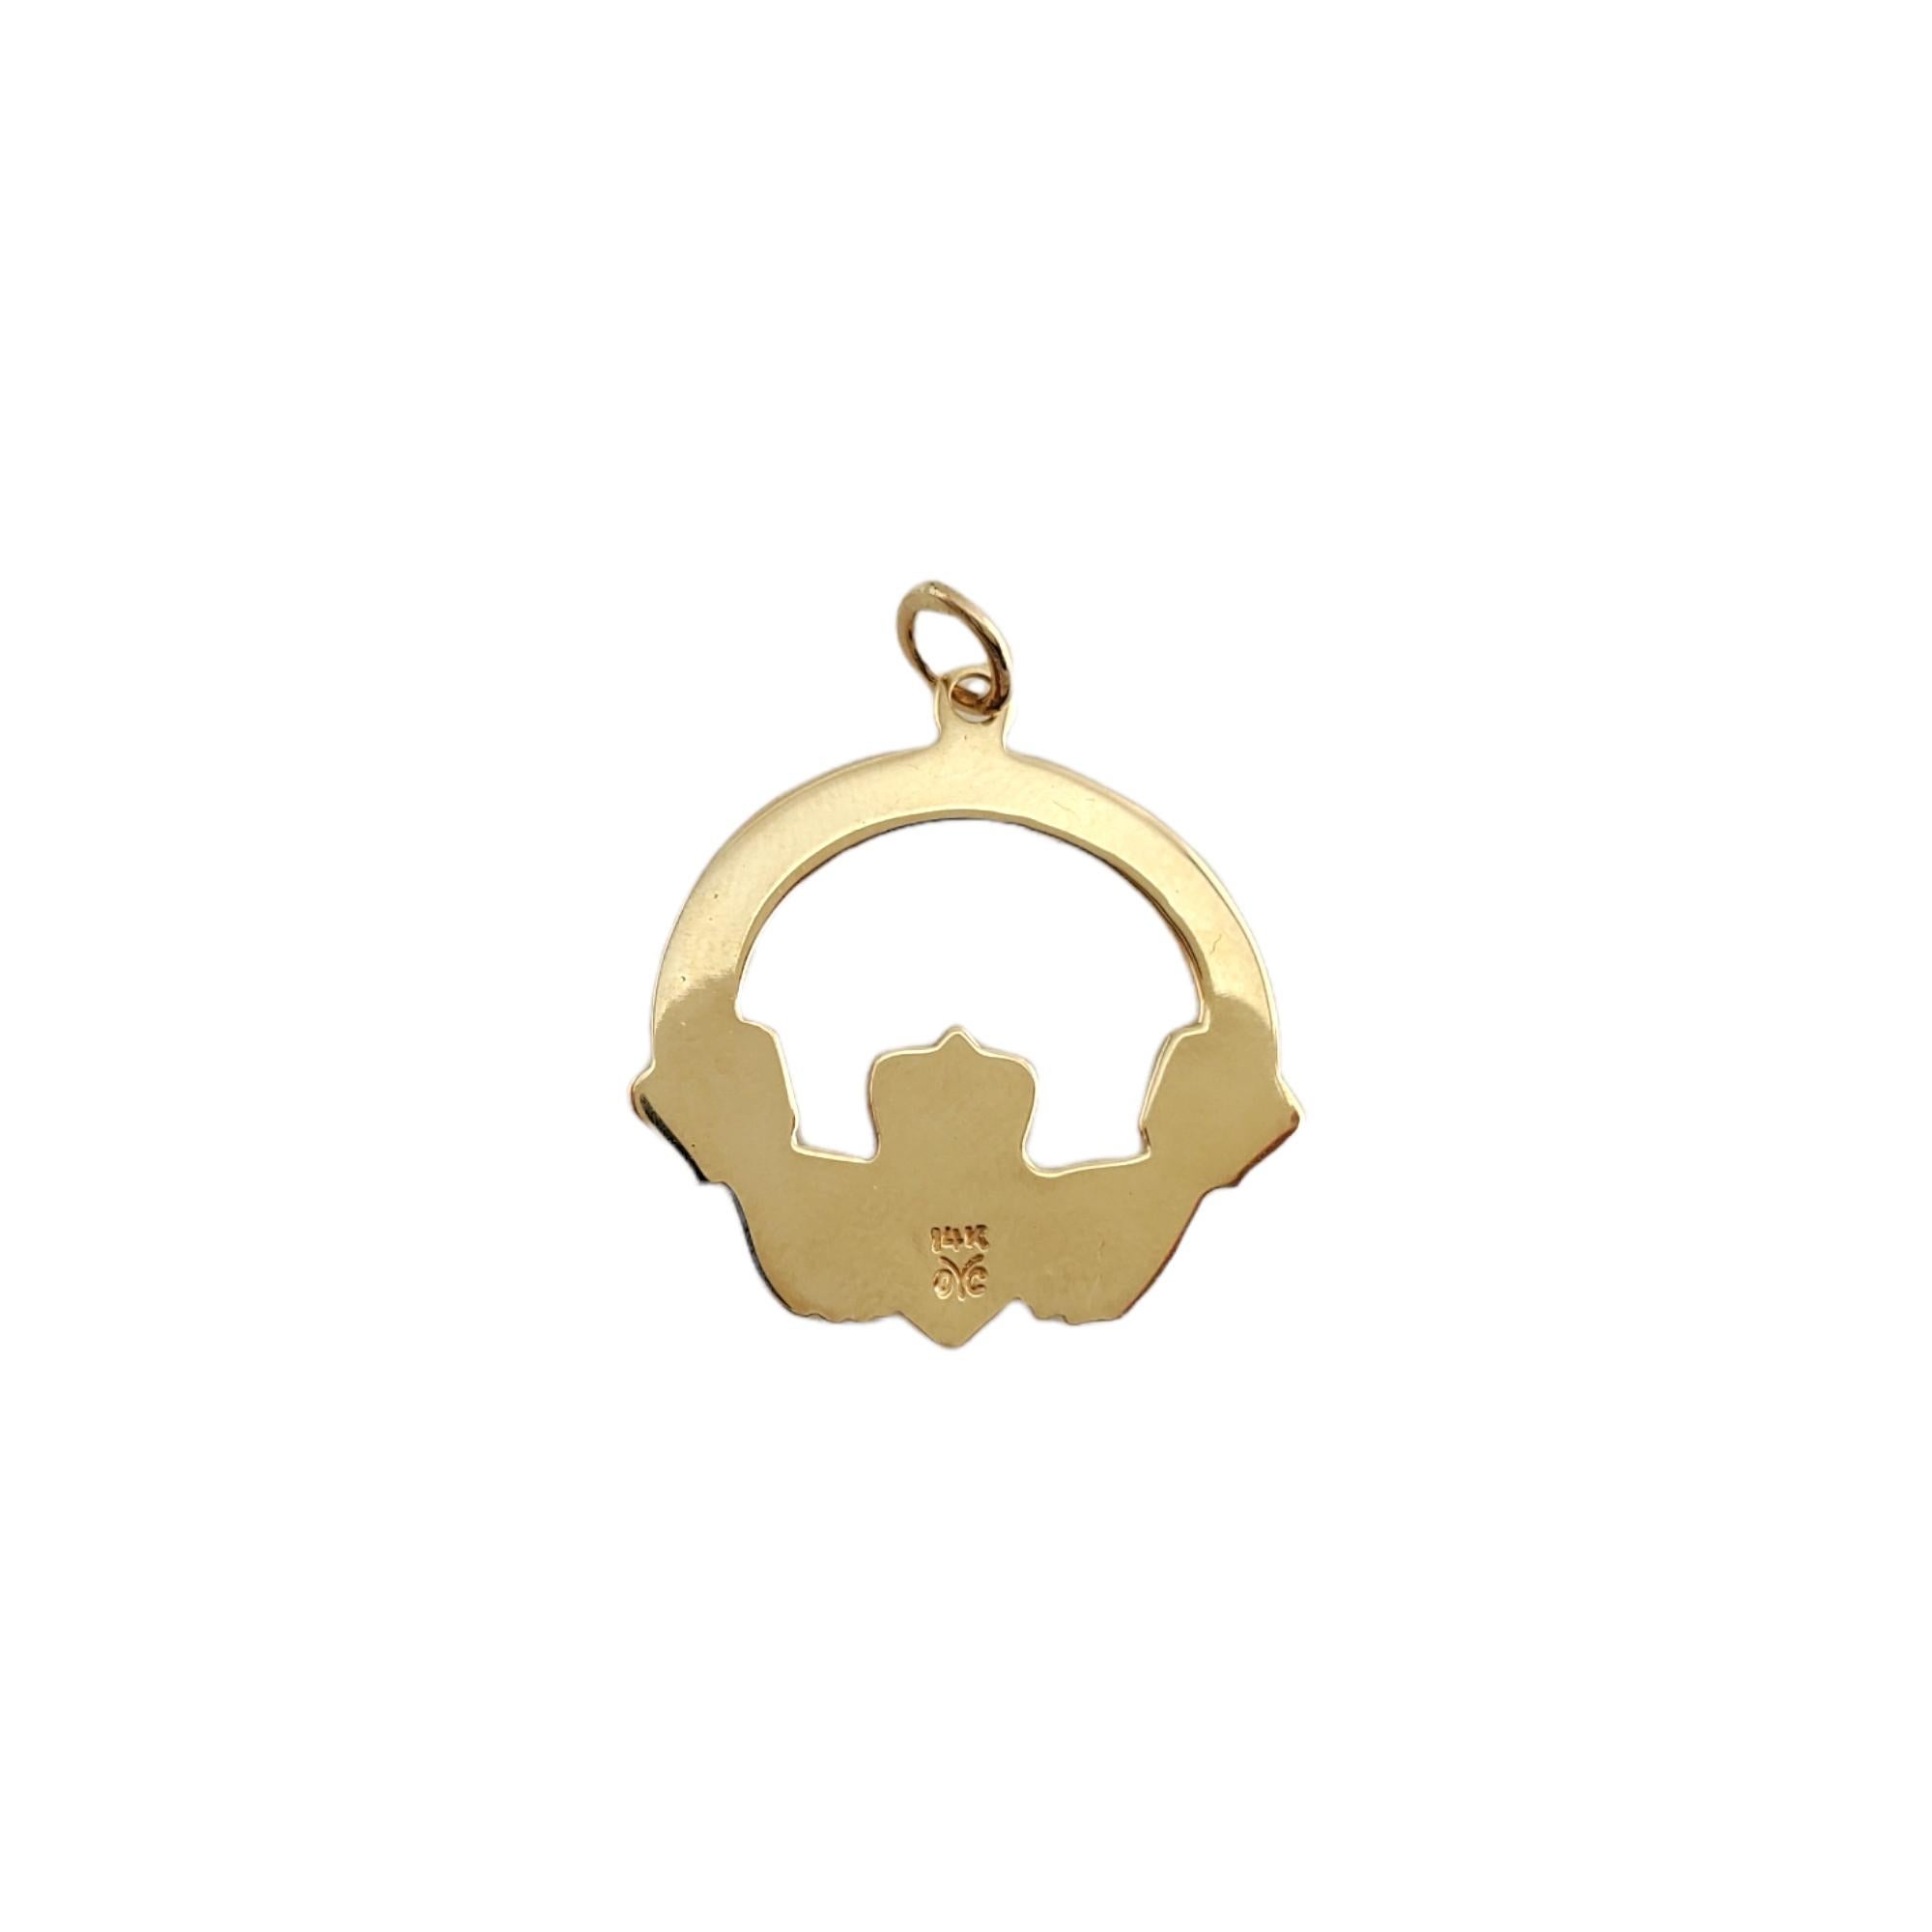 14K Yellow Gold Claddagh 
 
You'll love this beautiful yellow gold Claddagh! 

Size: 22.25mm X 22.90mm

Weight: 2.3 gr /  1.4dwt

Hallmark: 14K  oYc 

Very good condition, professionally polished.

Will come packaged in a gift box and will be